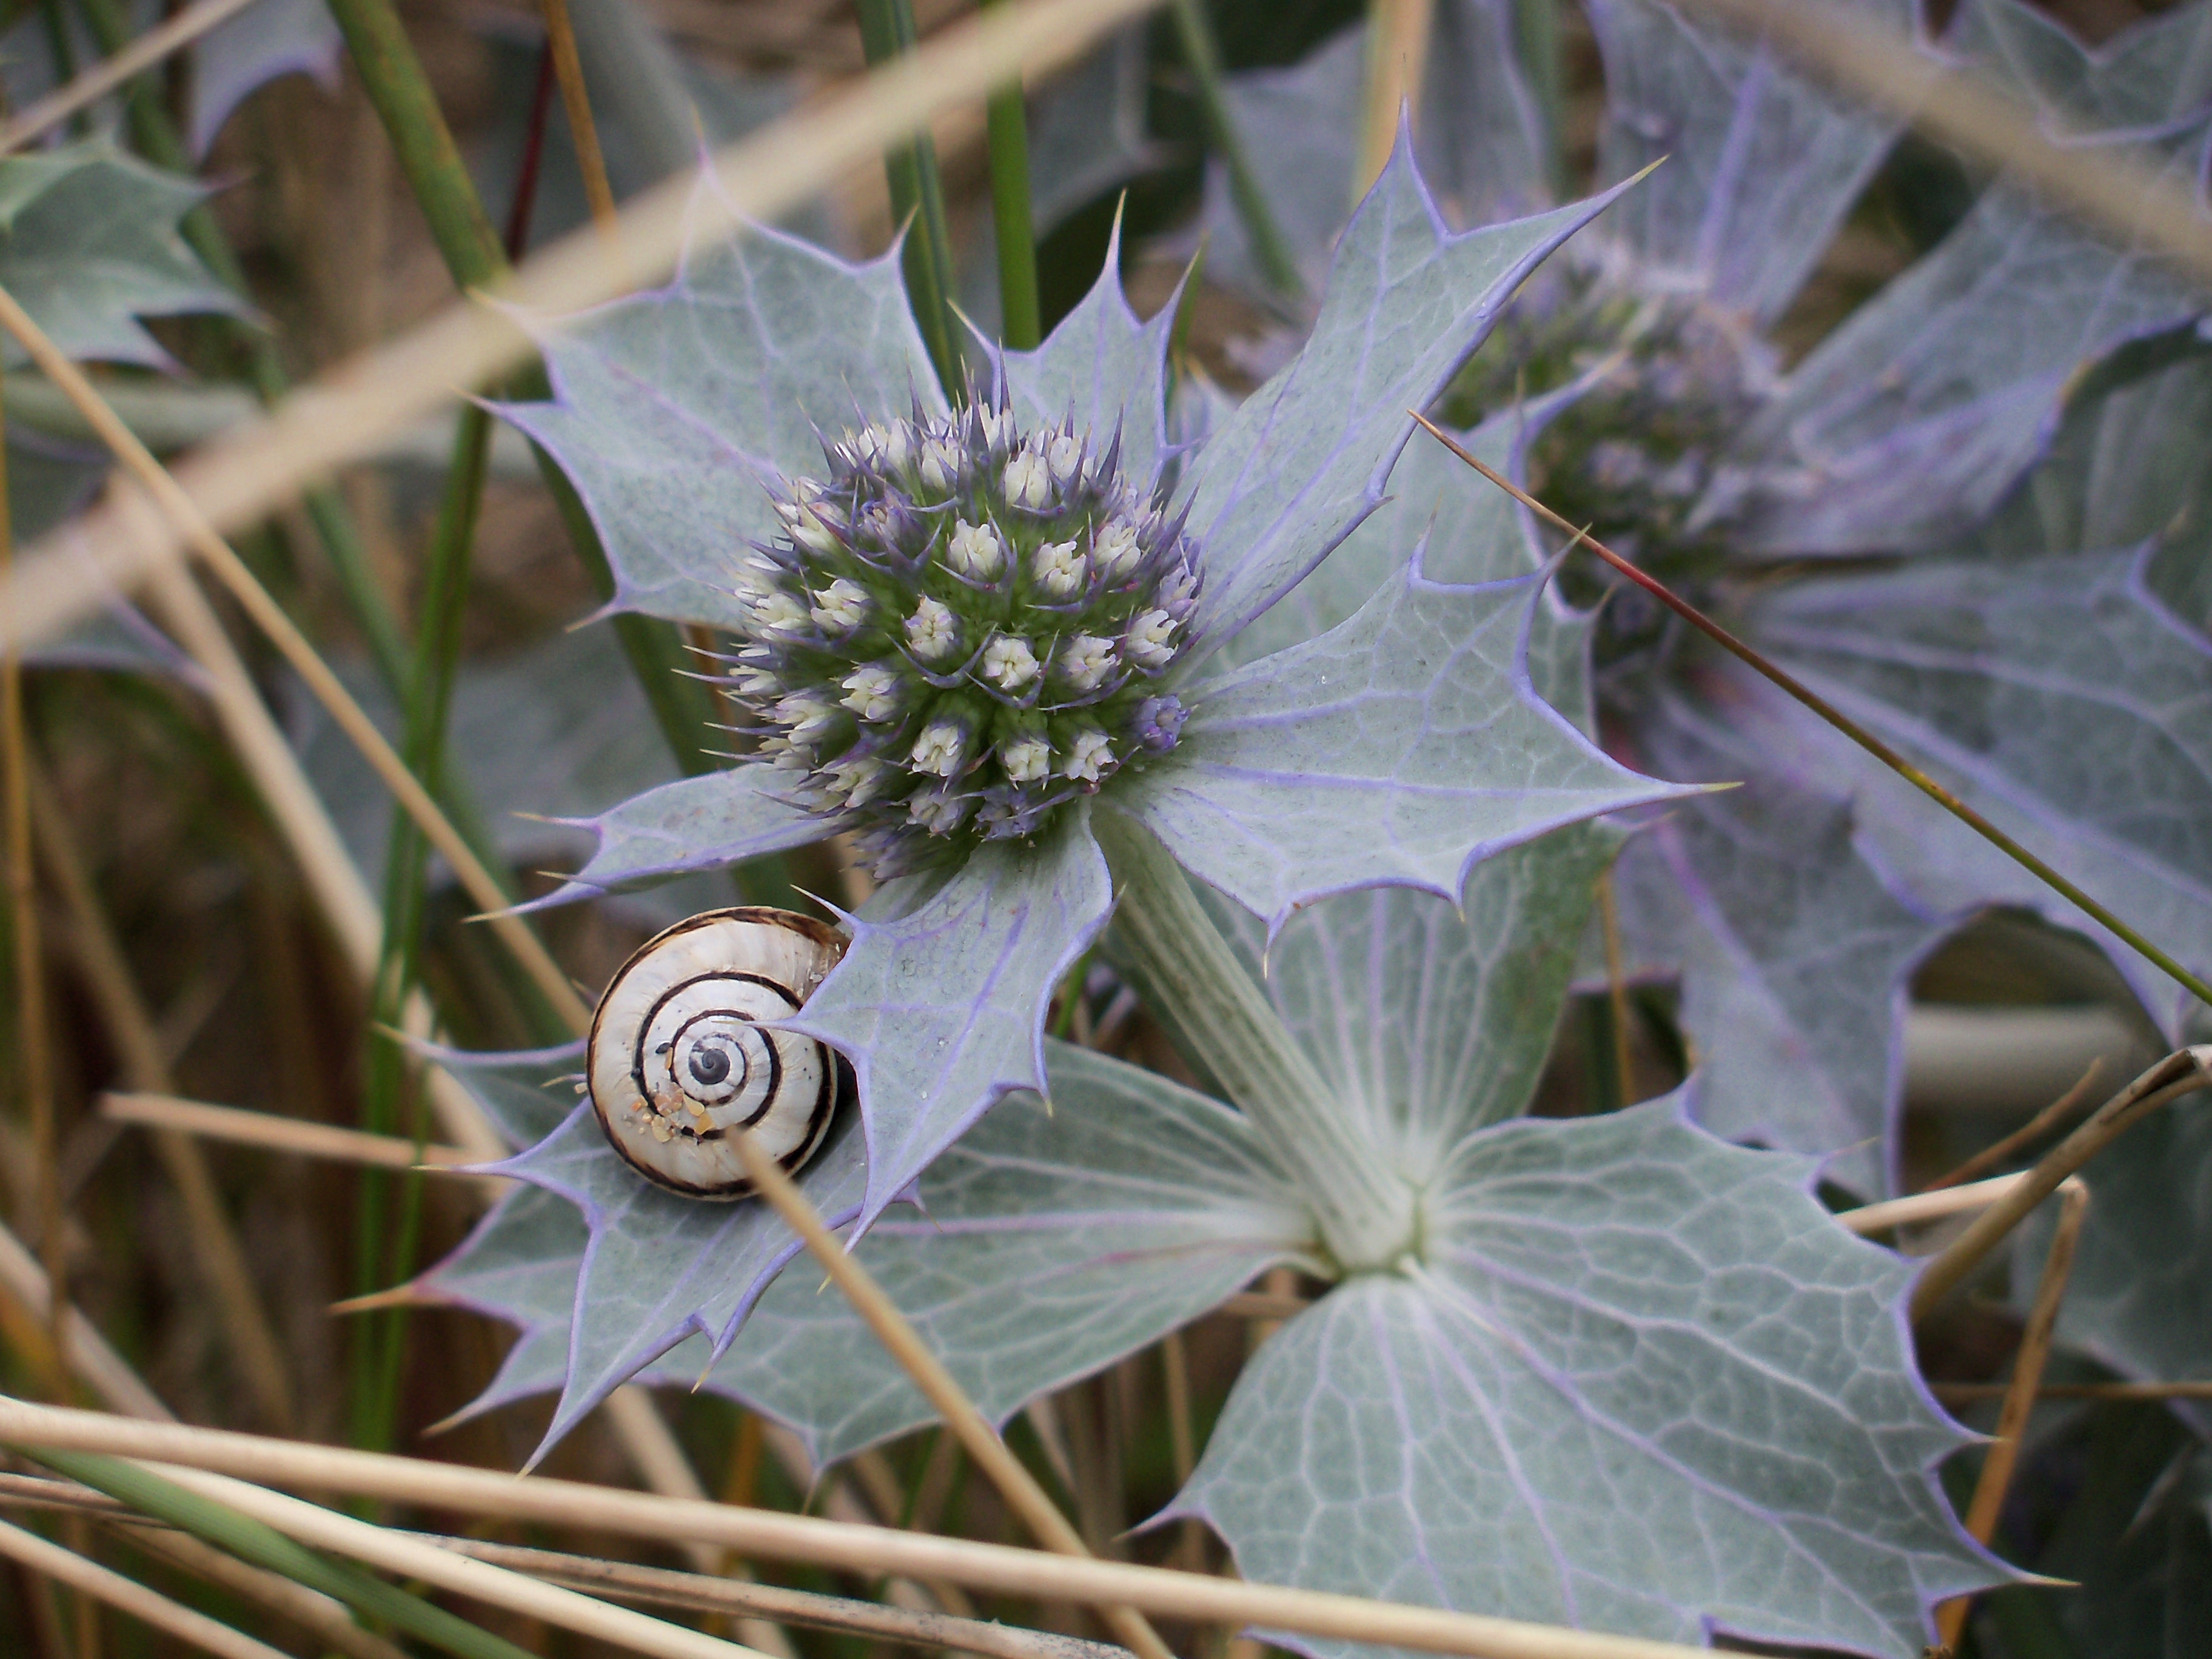 snail on thistle - Community - Farmers Weekly